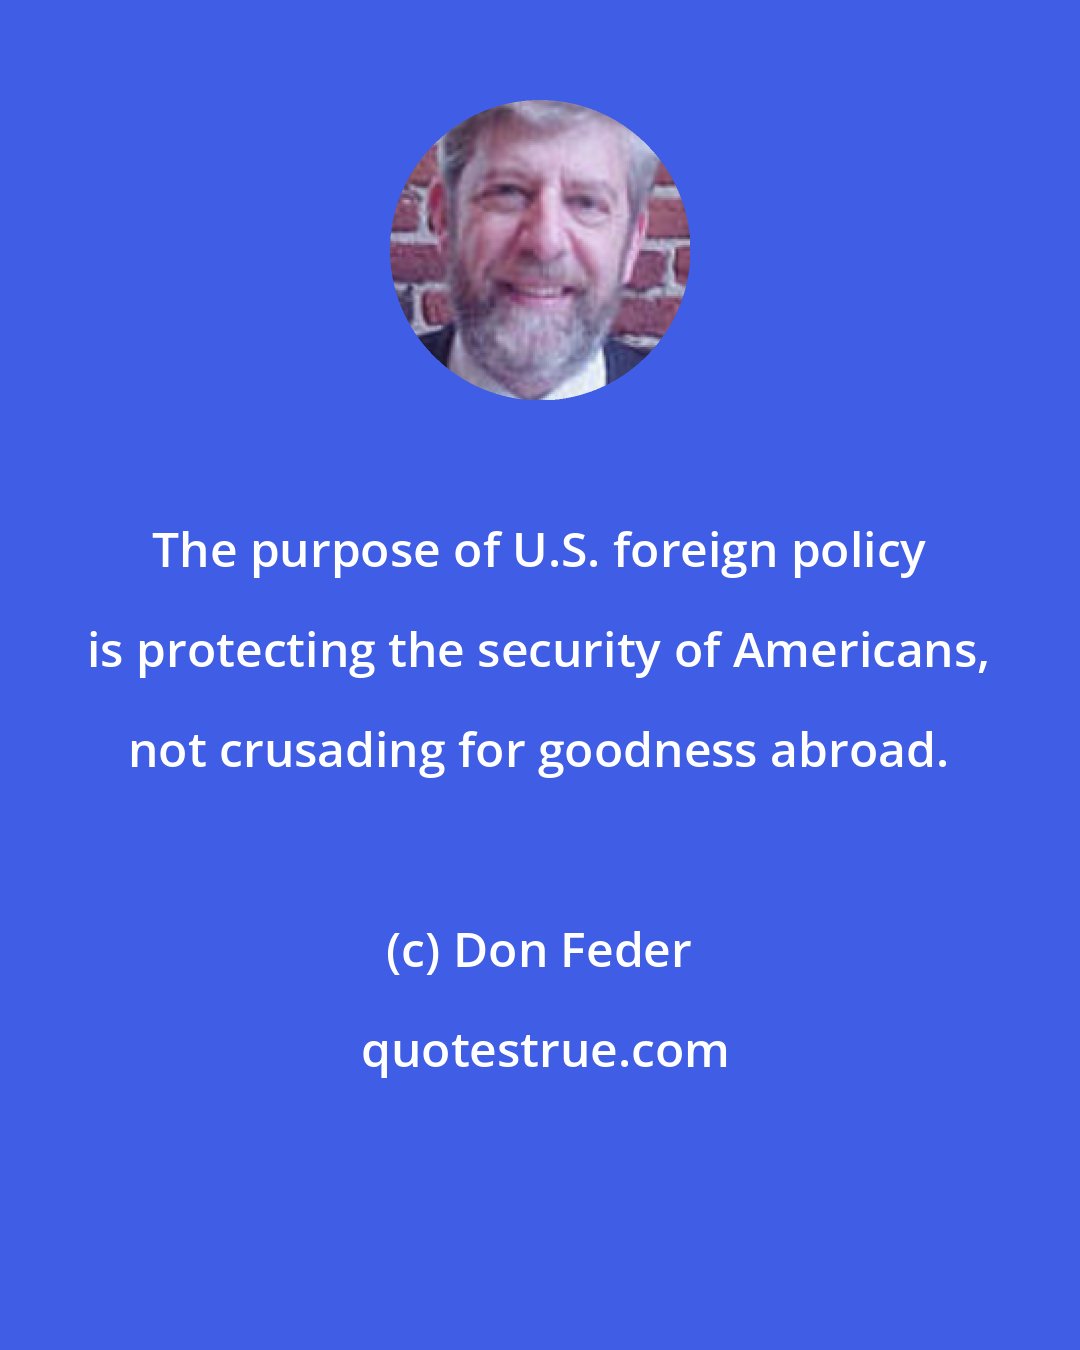 Don Feder: The purpose of U.S. foreign policy is protecting the security of Americans, not crusading for goodness abroad.